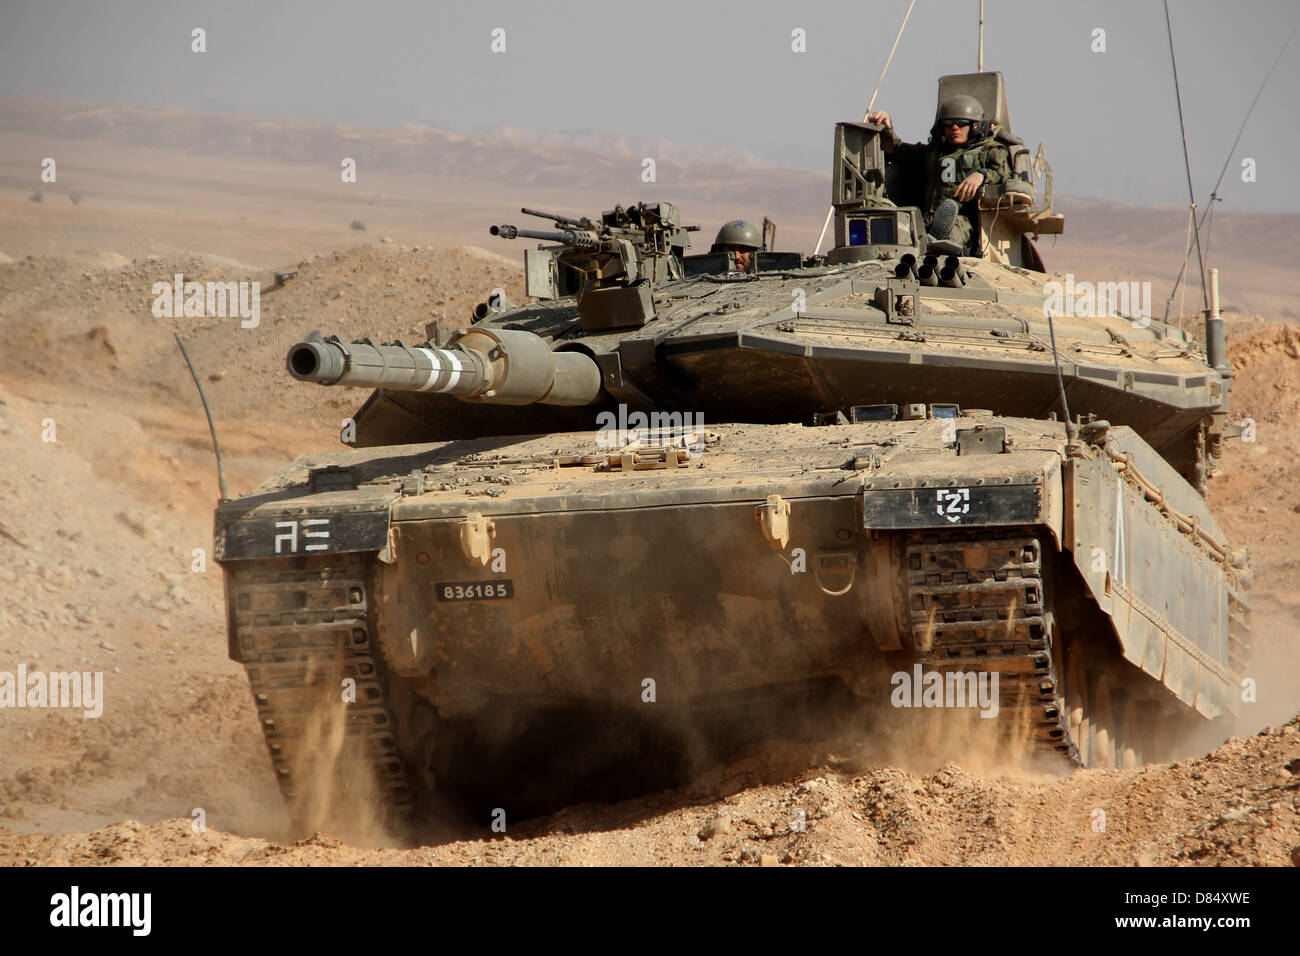 An Israel Defense Force Merkava Mark IV main battle tank. Note the instructor's chair fitted on board the tank's turret Stock Photo